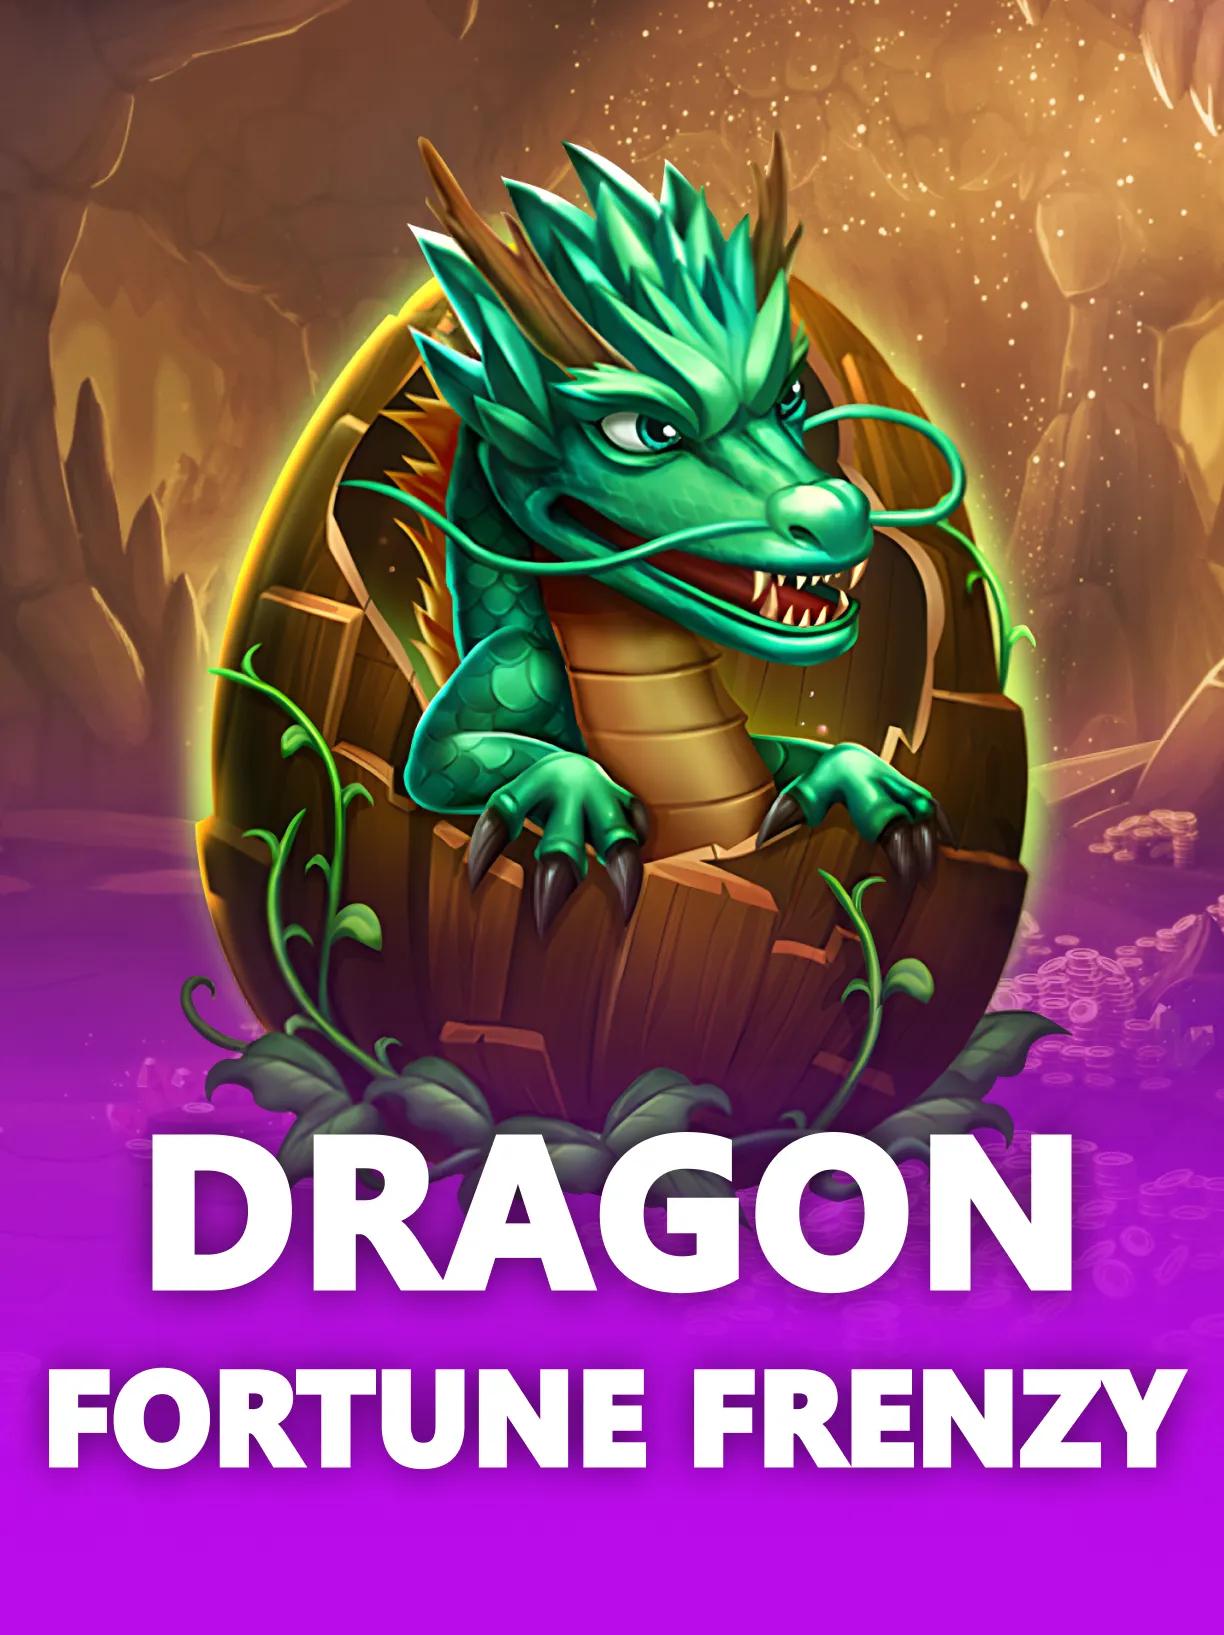 dragon-fortune-frenzy-square.webp